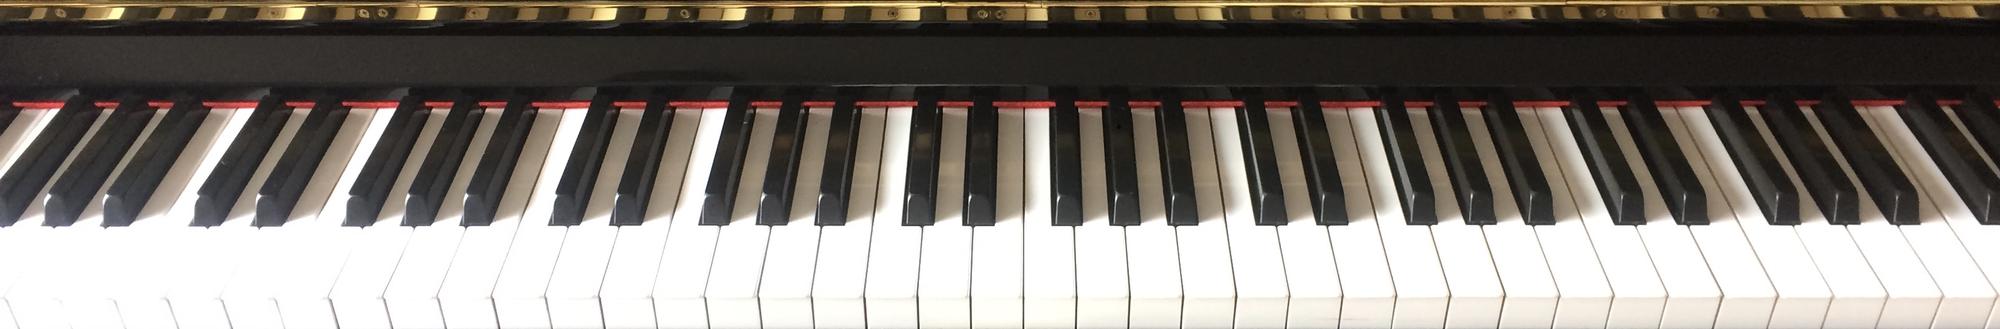 my beautiful yamaha piano, gorgeous to play and teach on.